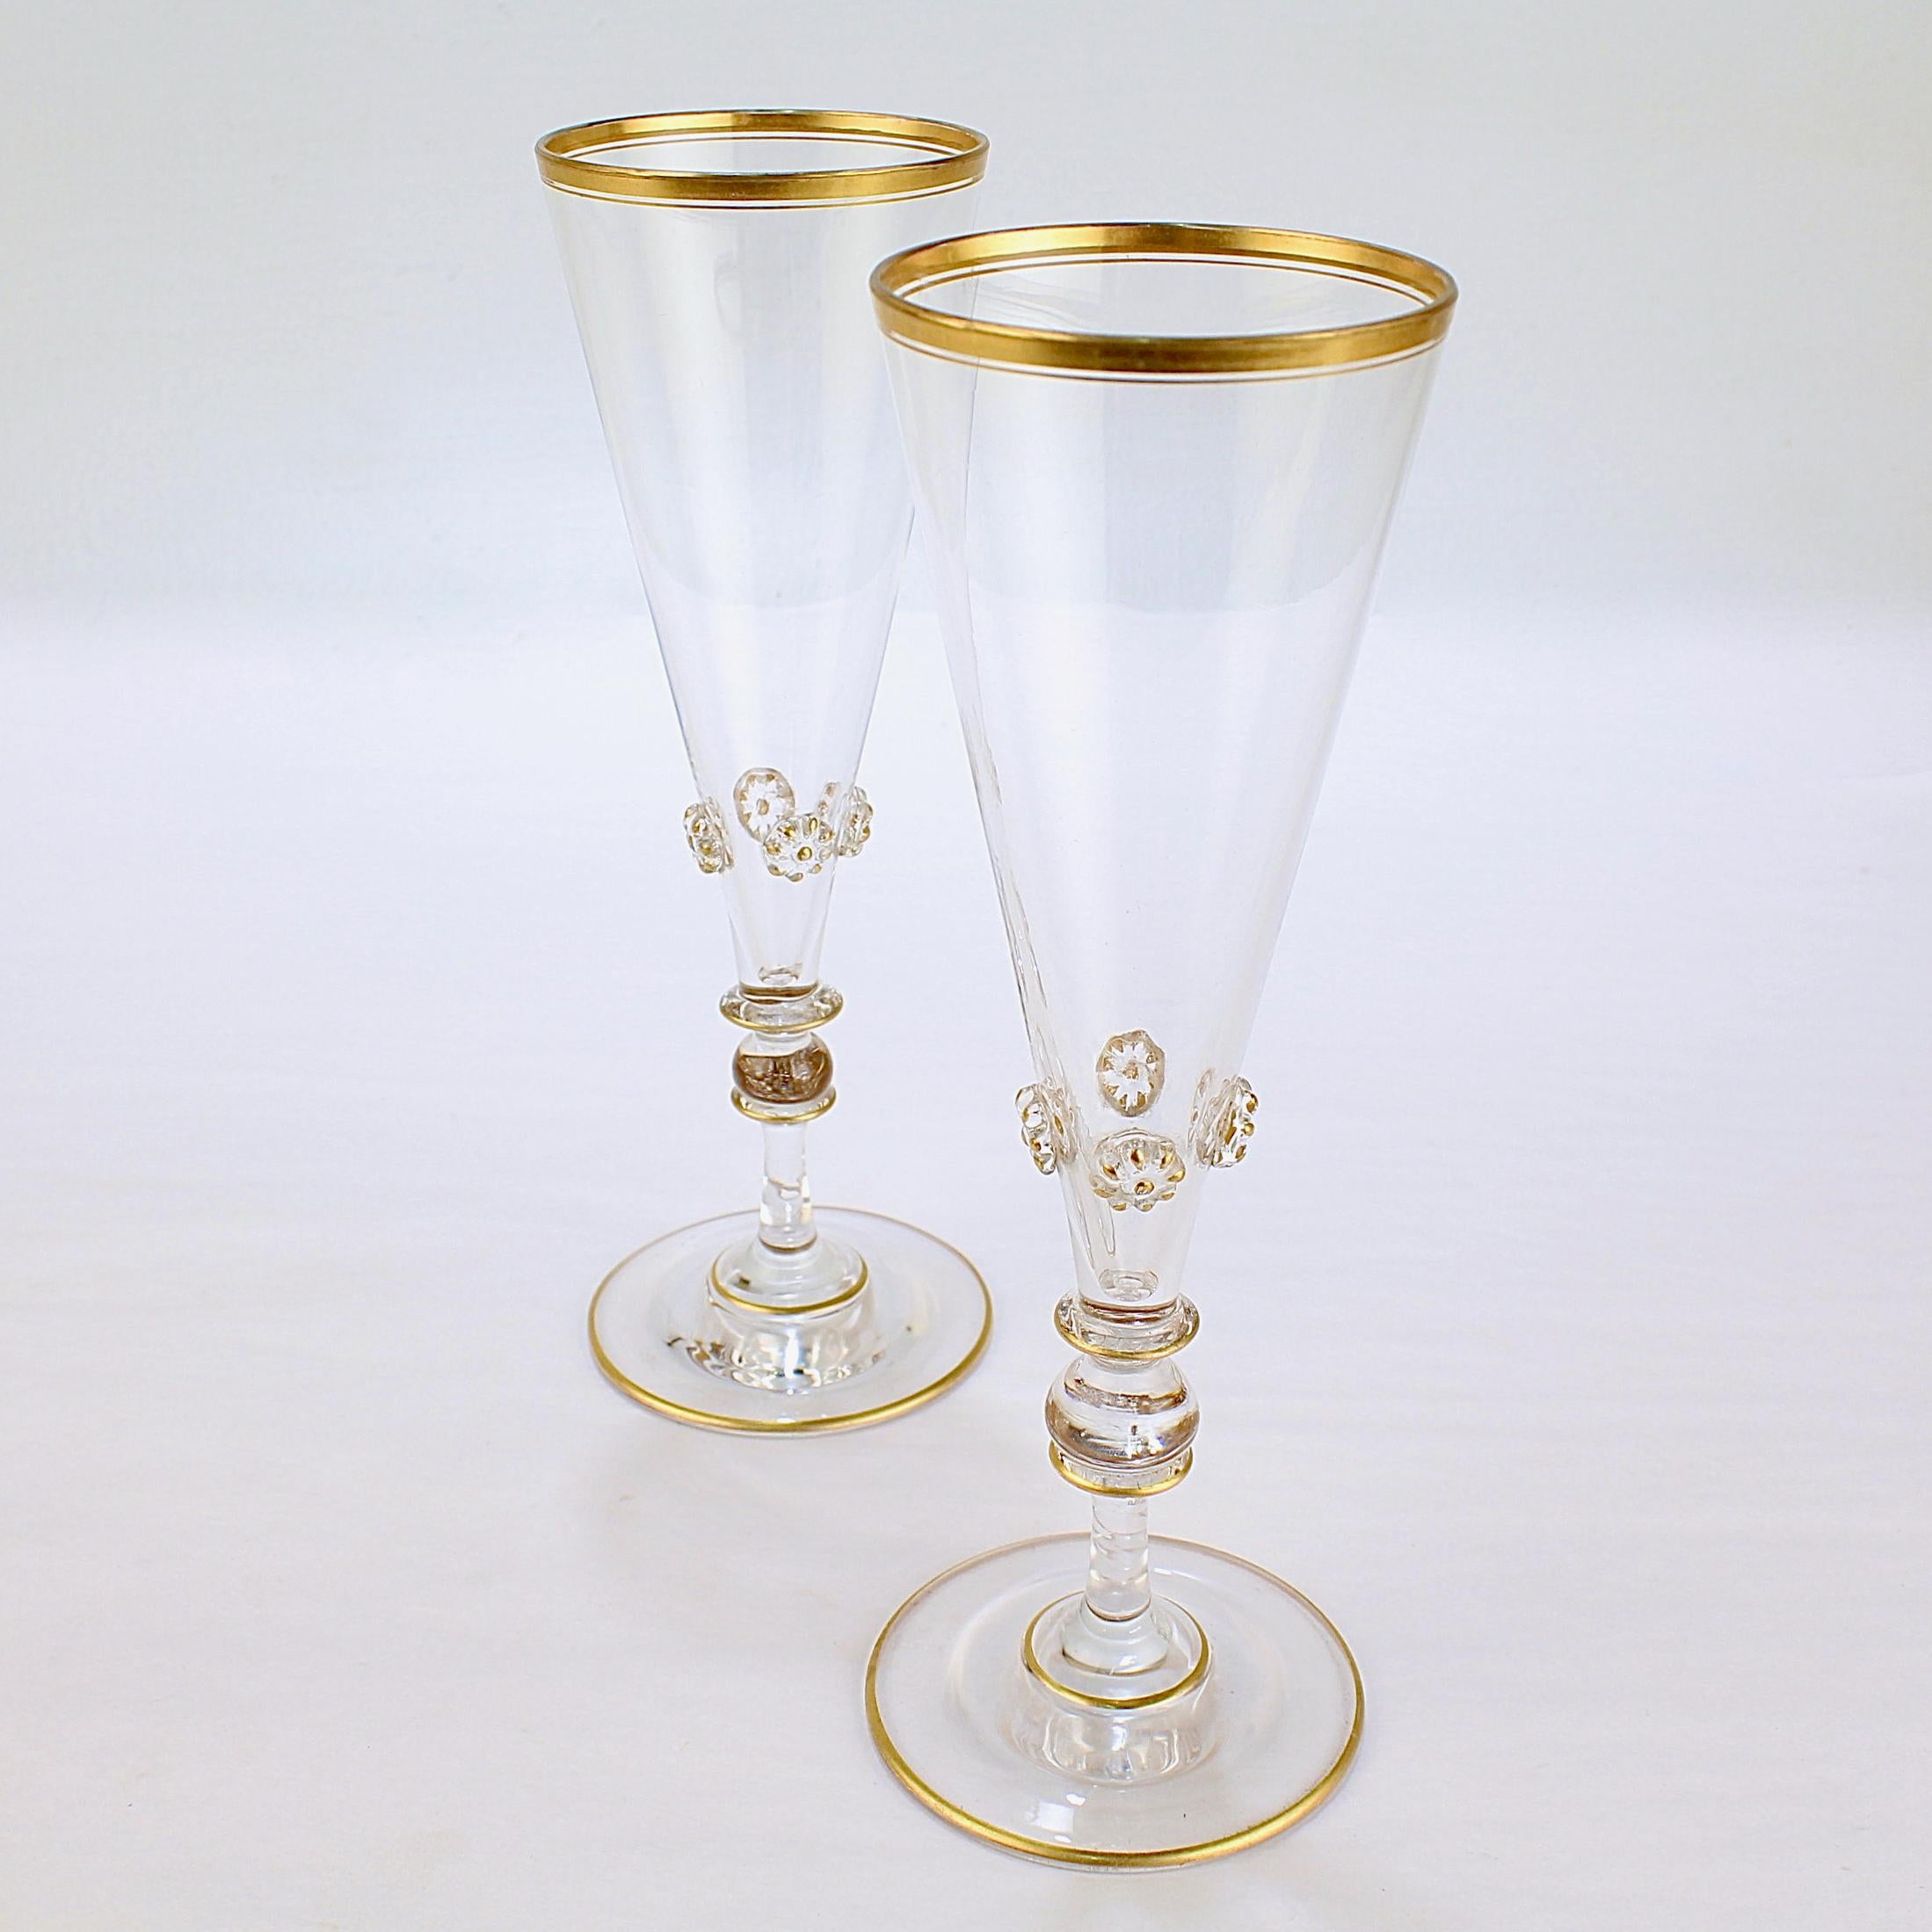 A fine pair of vintage glass champagne flutes.

Likely Bohemian.

With gold trim and highlights throughout and applied knops at the base of each glass cup.

Simply a wonderful pair of toasting stems!

Date:
Early to mid-20th